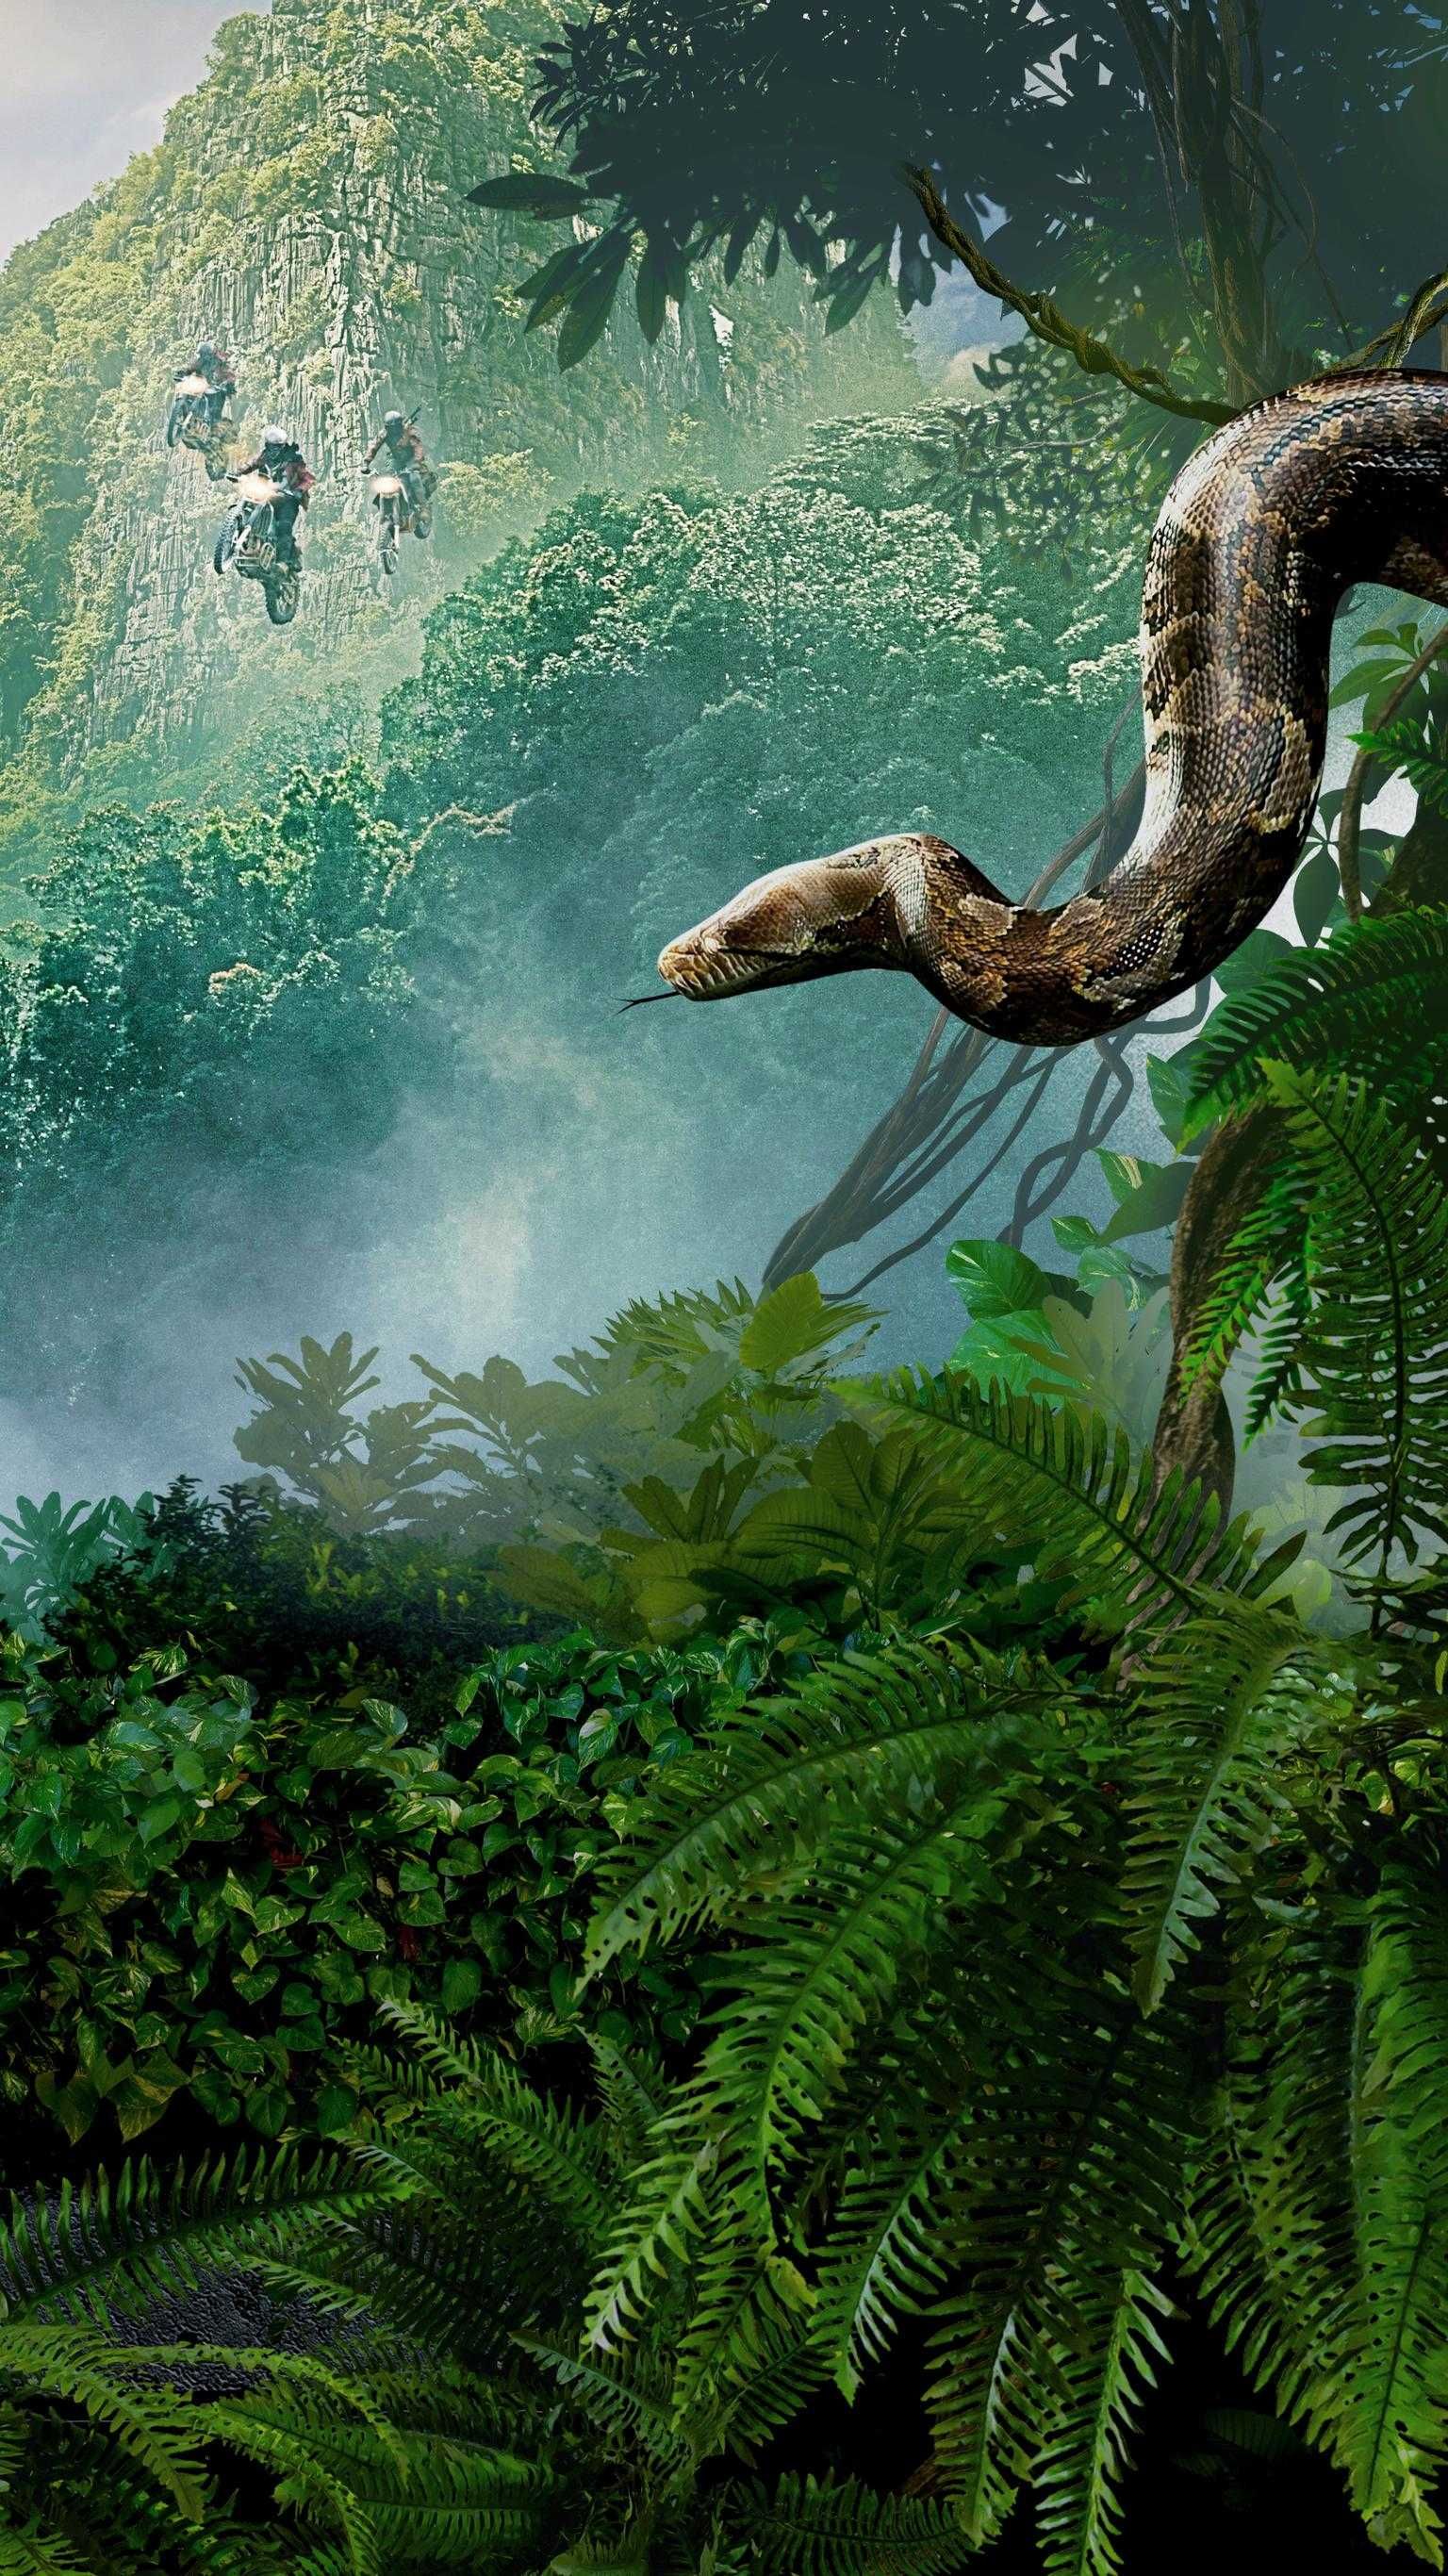 A snake on a tree branch in the jungle - Jungle, snake